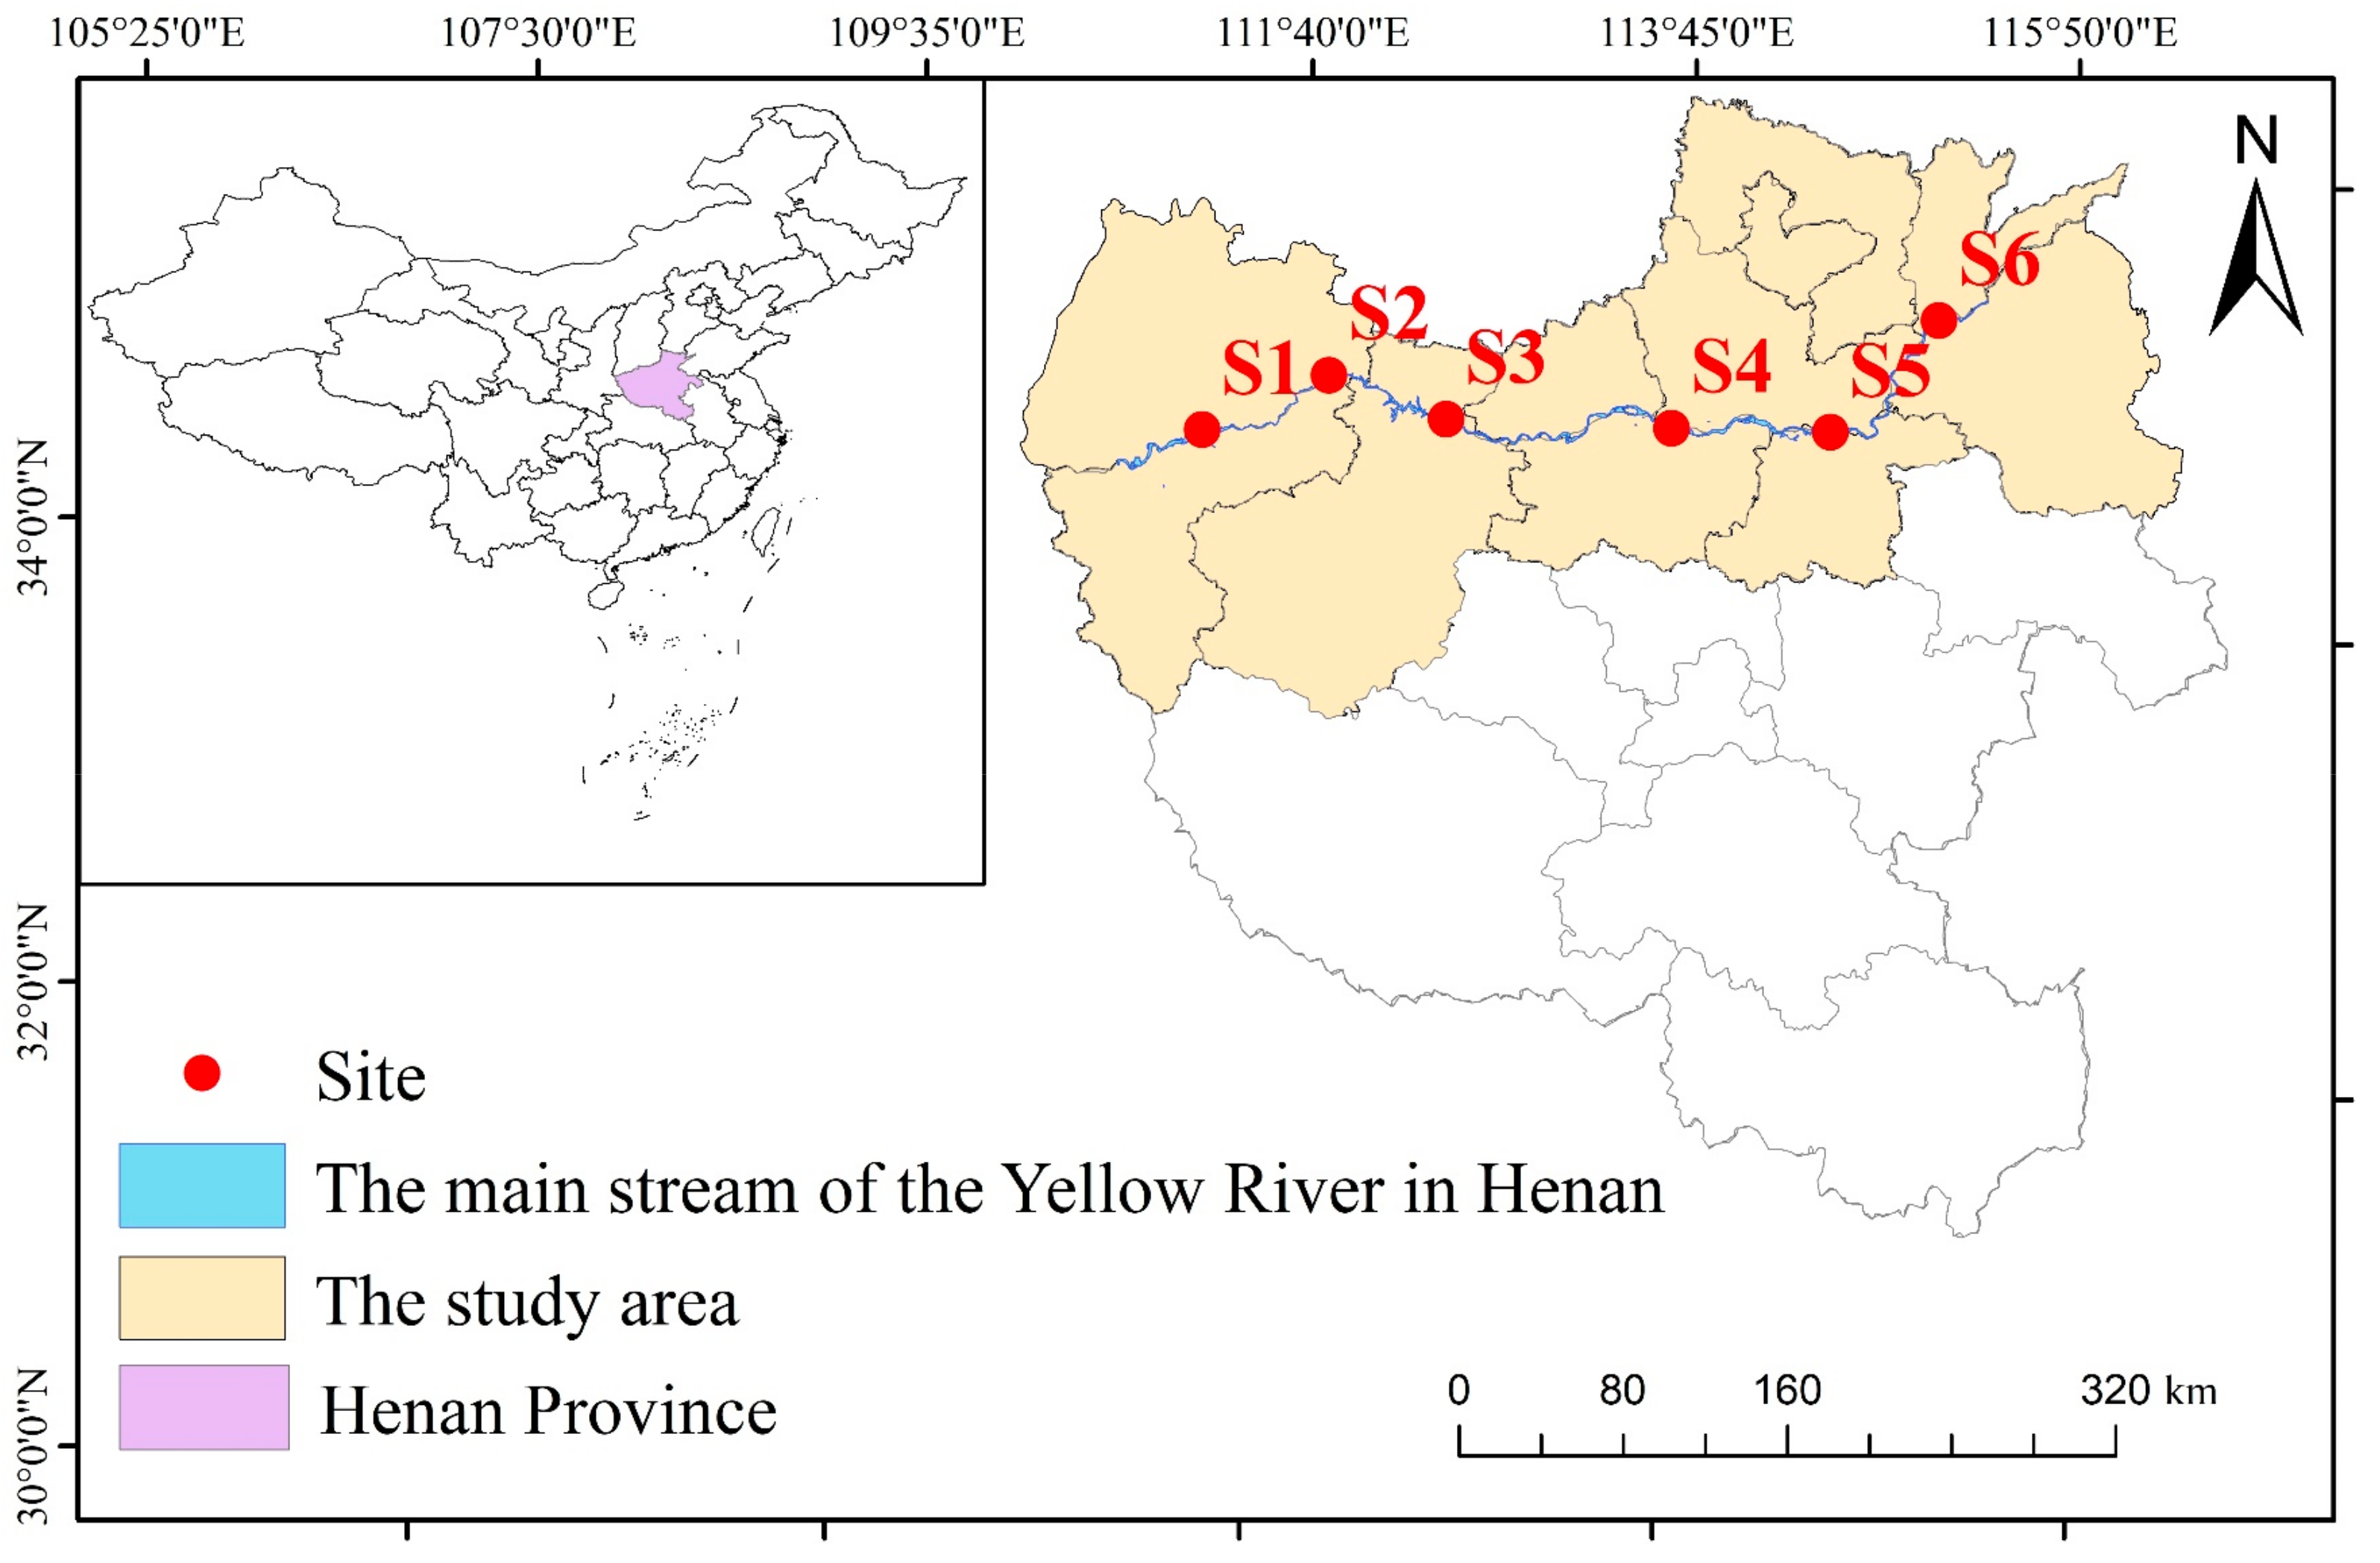 Spatiotemporal changes of eutrophication and heavy metal pollution